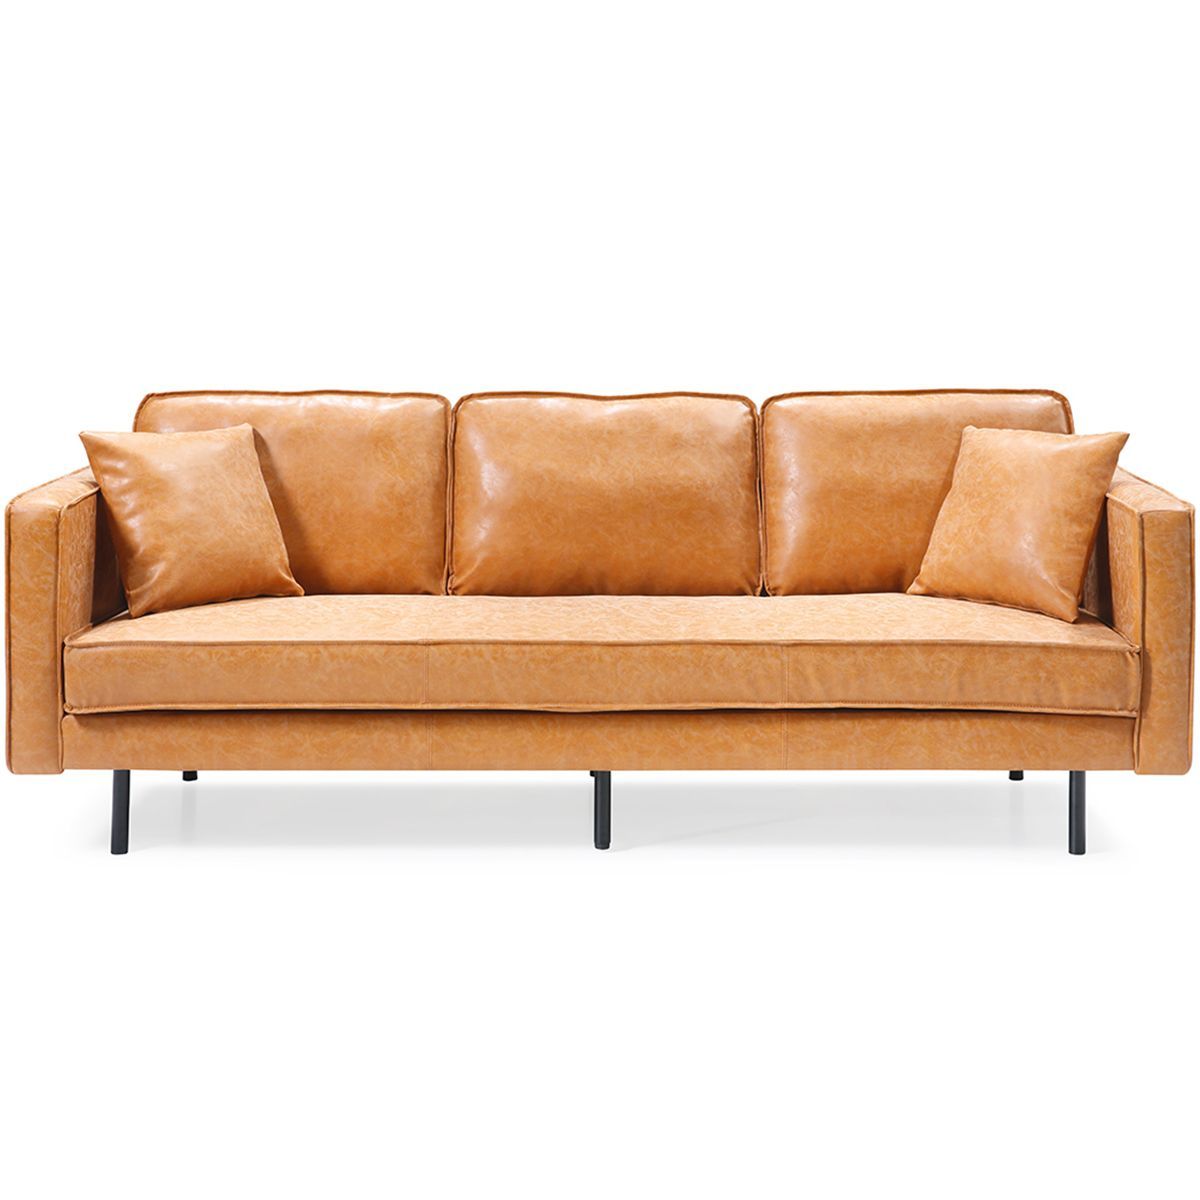 Verona 3 Seater Faux Leather Sofa | Temple & Webster Faux Leather Sofa In Traditional 3 Seater Faux Leather Sofas (View 9 of 20)